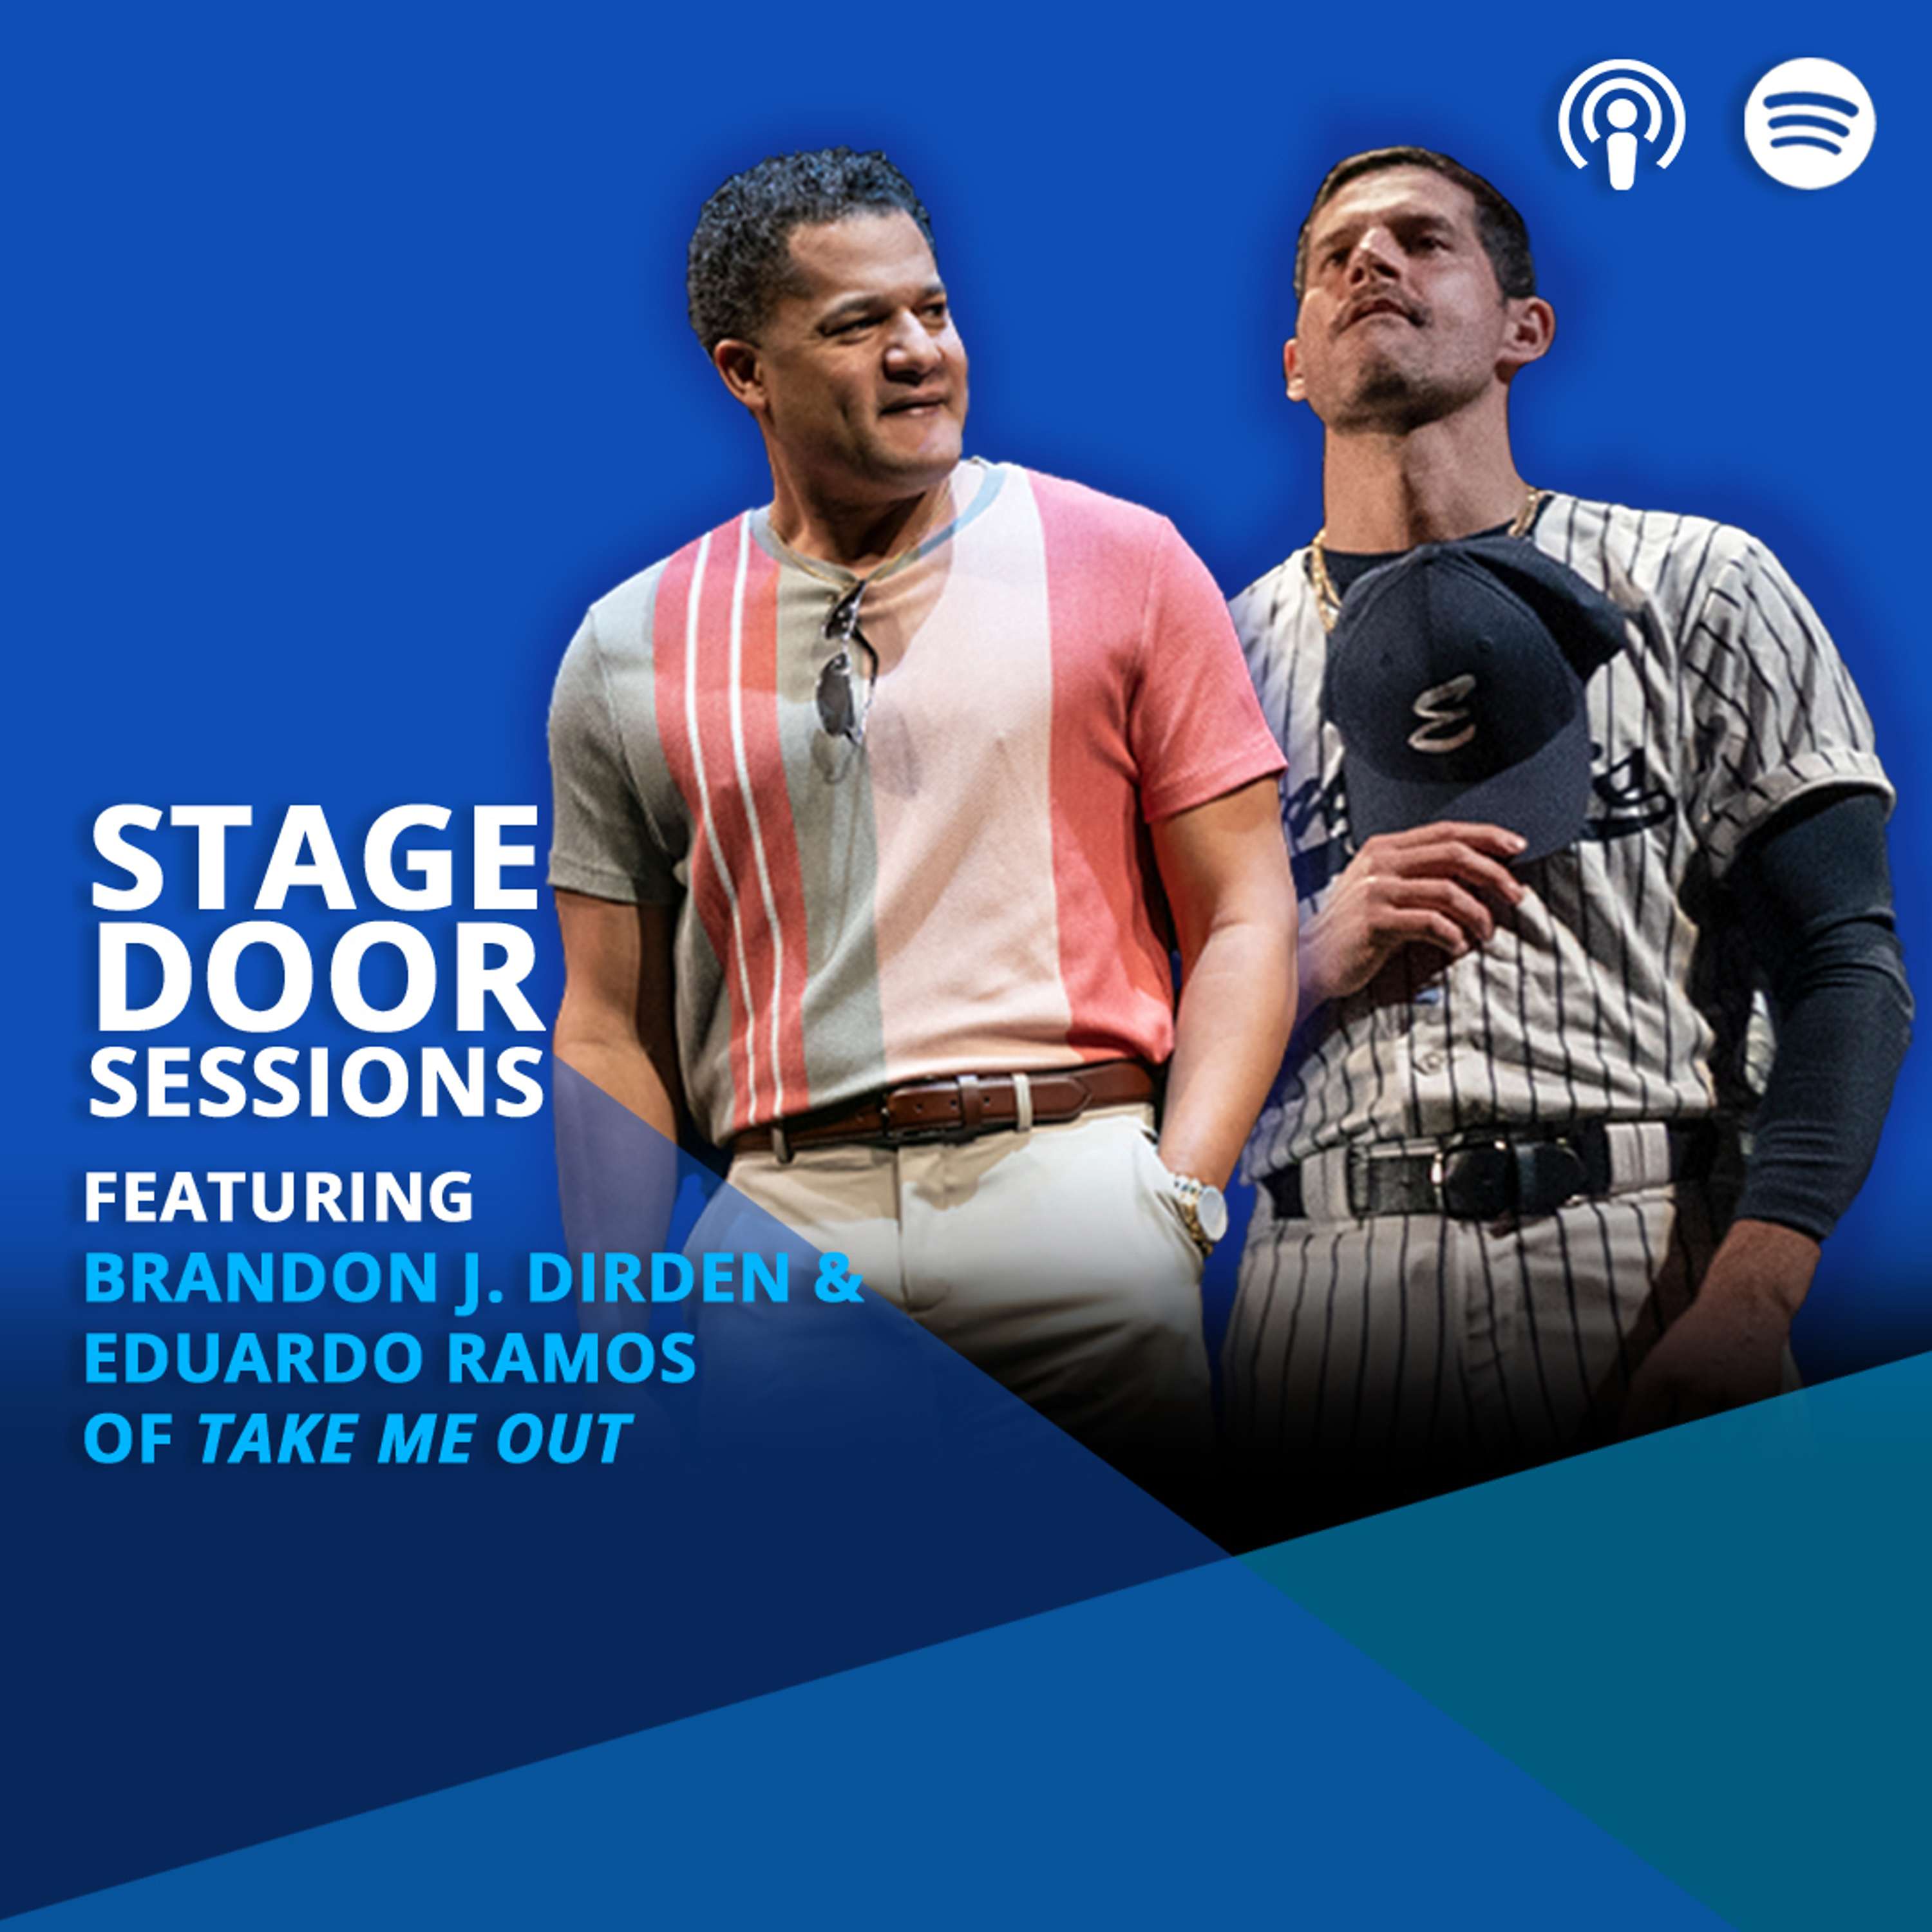 Take Me Out stars Brandon J. Dirden and Eduardo Ramos on Becoming a Team, Asking Essential Questions, and THAT Shower Scene